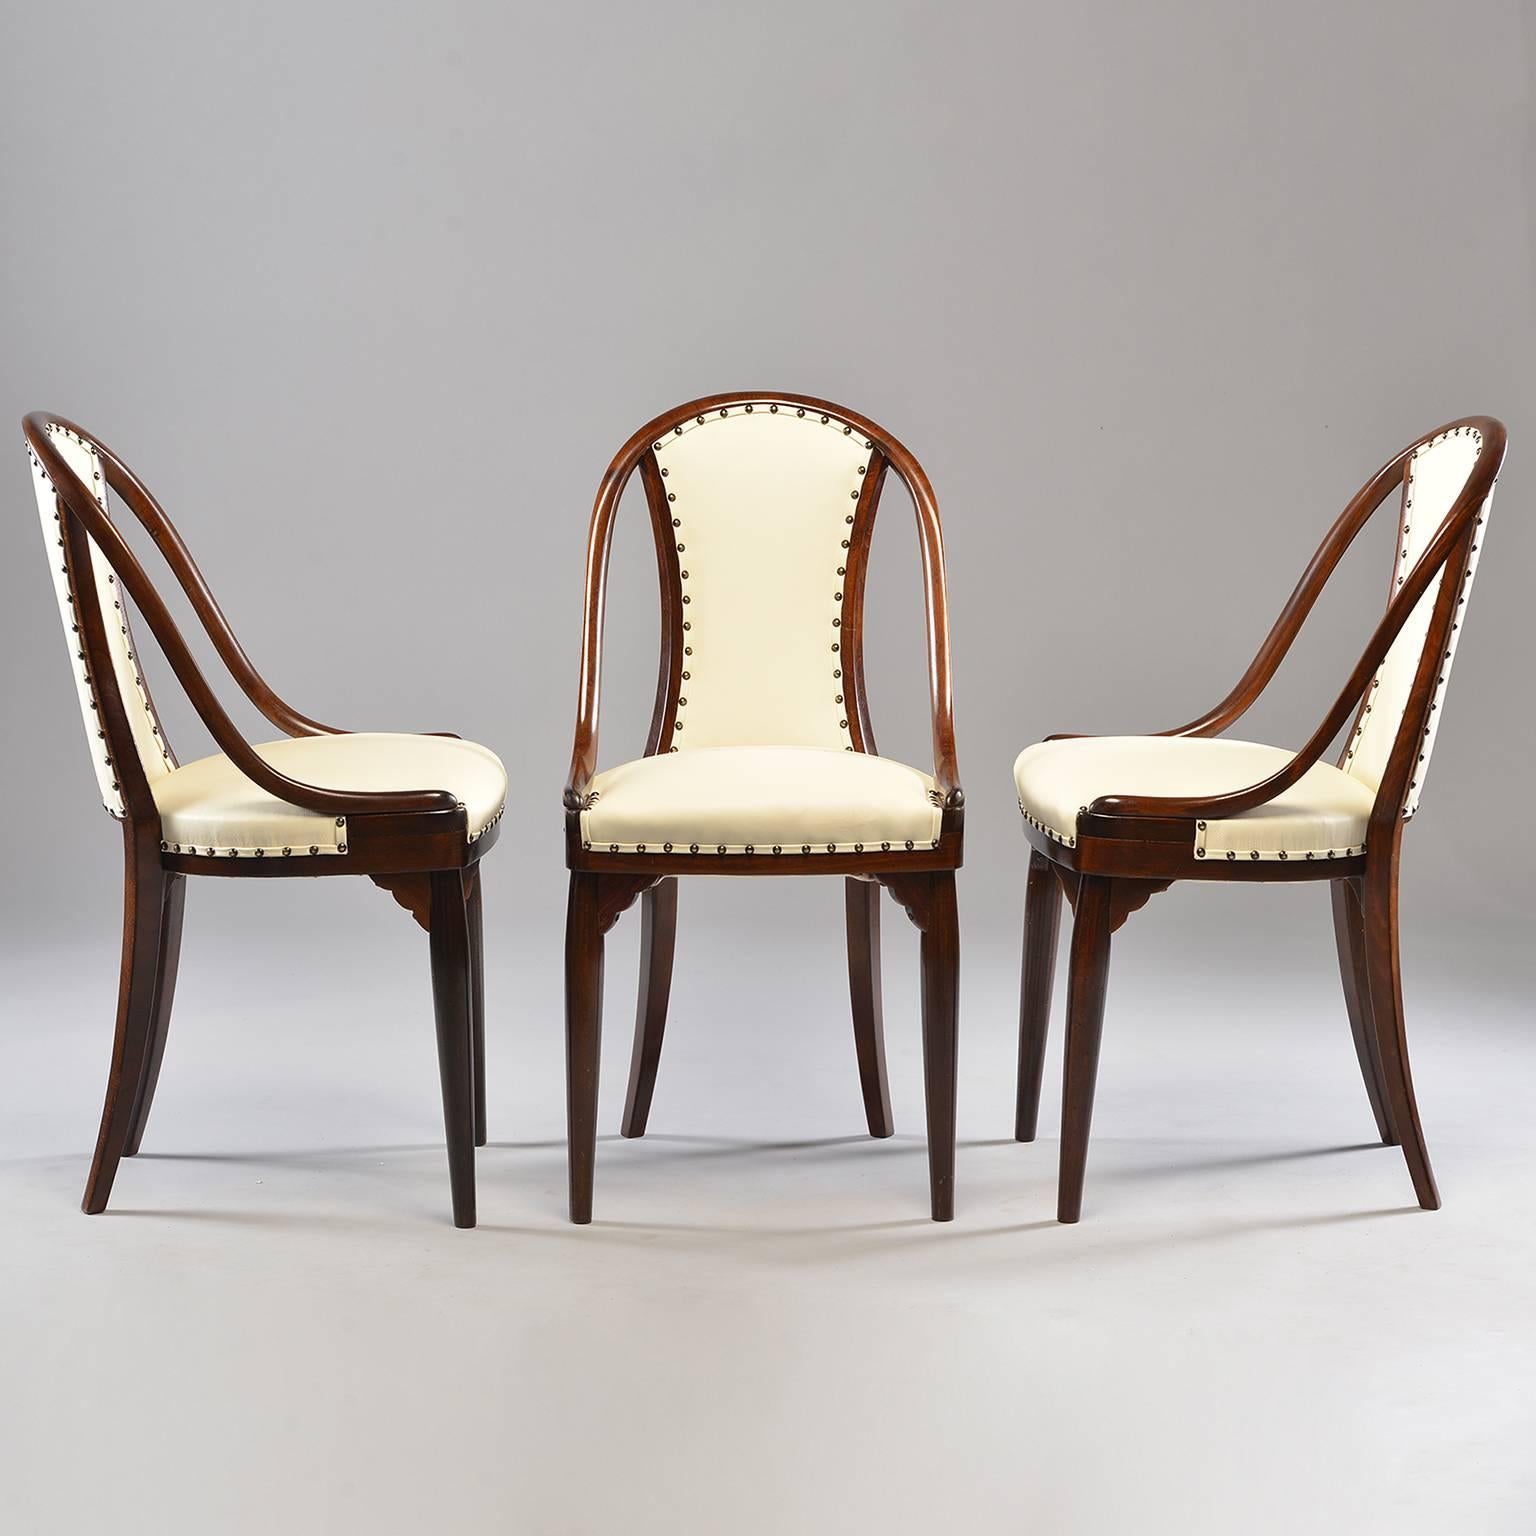 Set of six chairs attributed to Otto Prutscher for Thonet of Austria, circa 1920s. Dark bentwood frames with padded seats and back rests. Decorative fluted front corner leg supports. New off-white leather upholstery embellished with dark brass